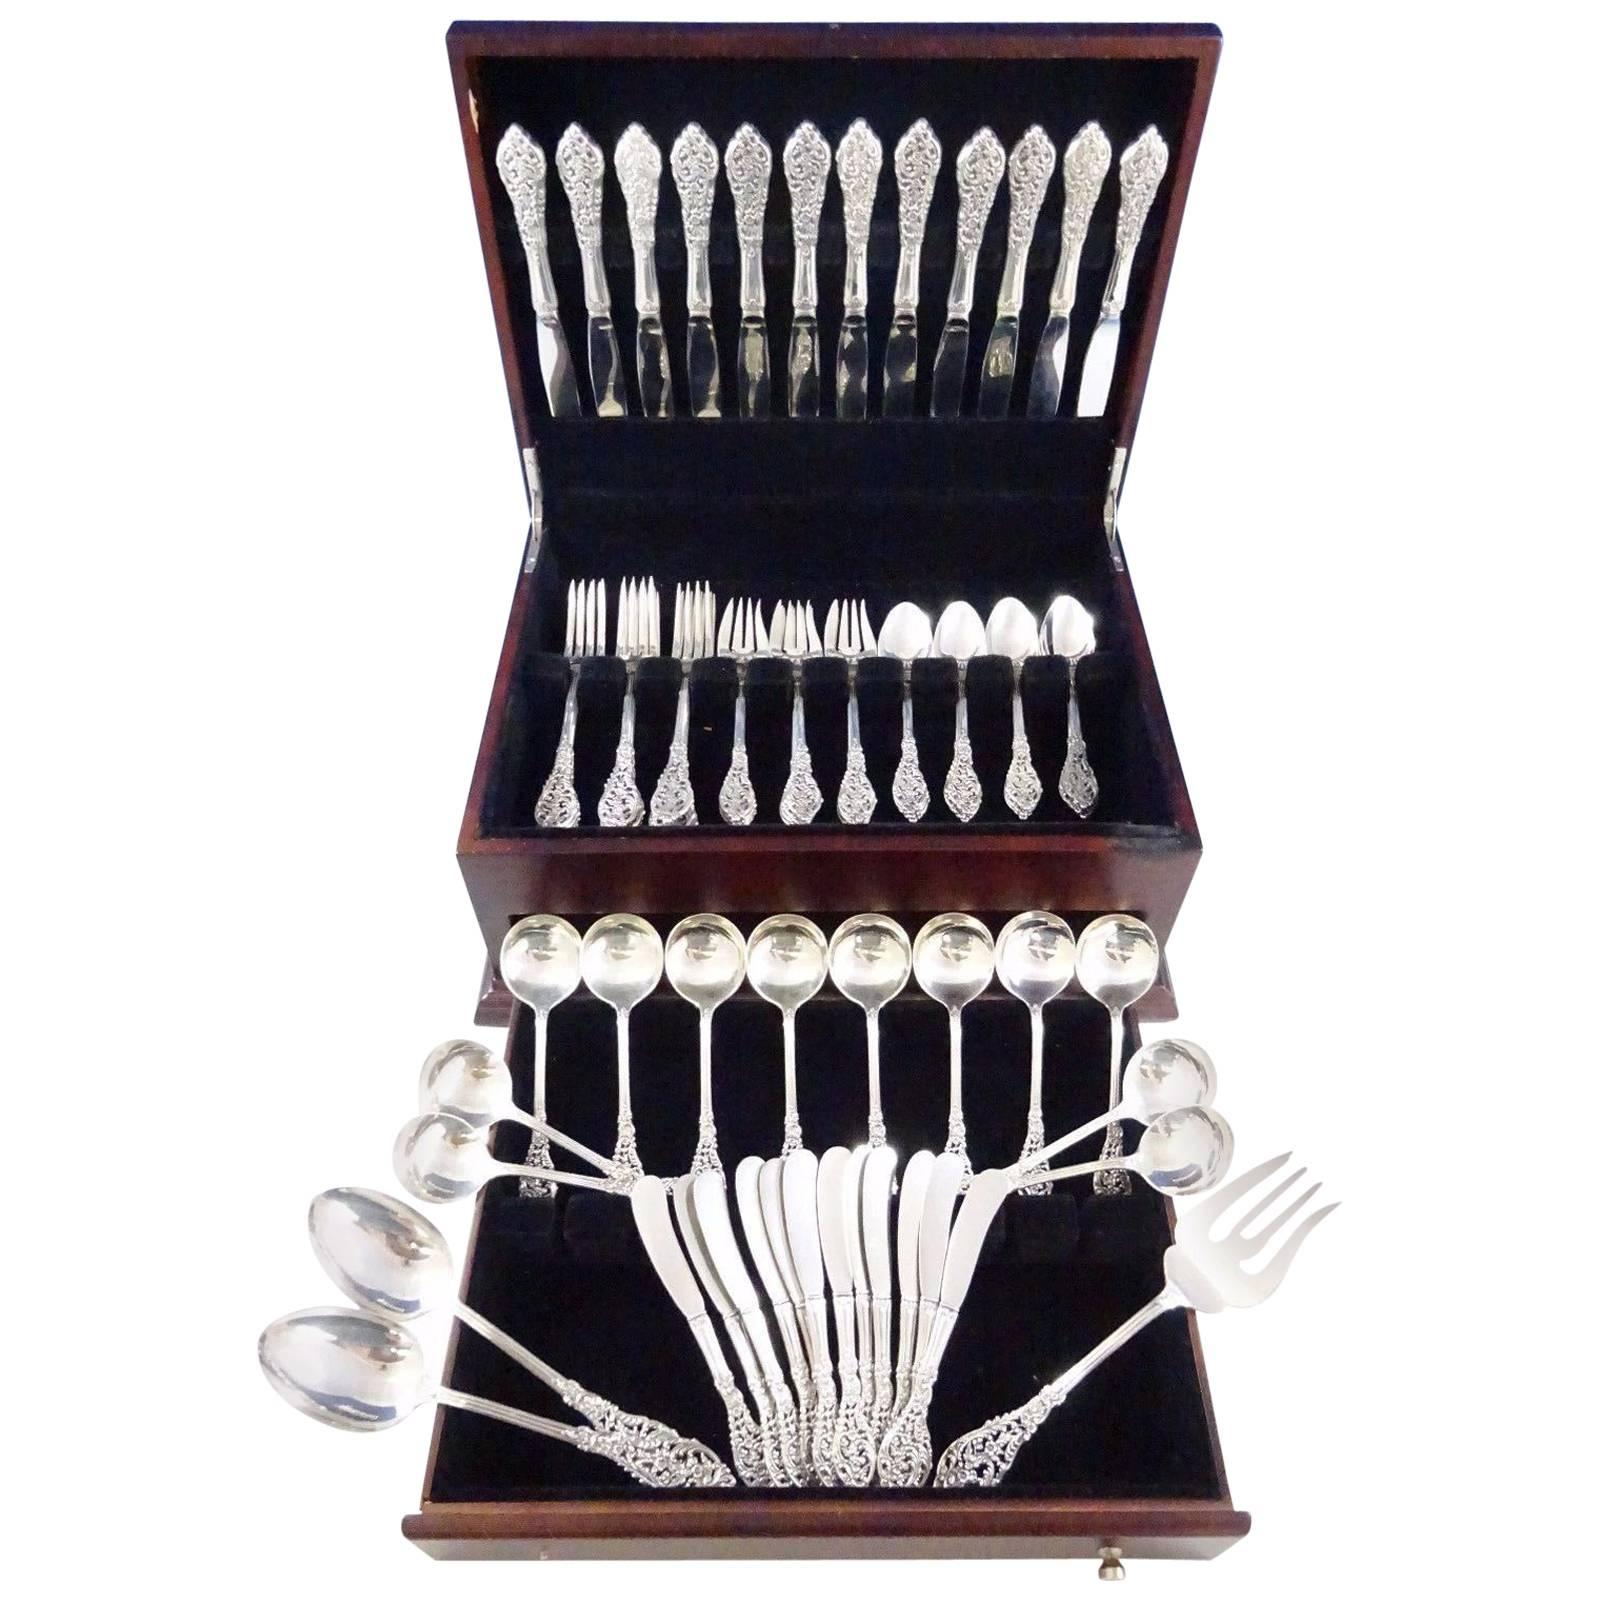 Florentine Lace by Reed & Barton sterling dilver flatware set of 75 pieces. This set includes: 

12 knives, 9